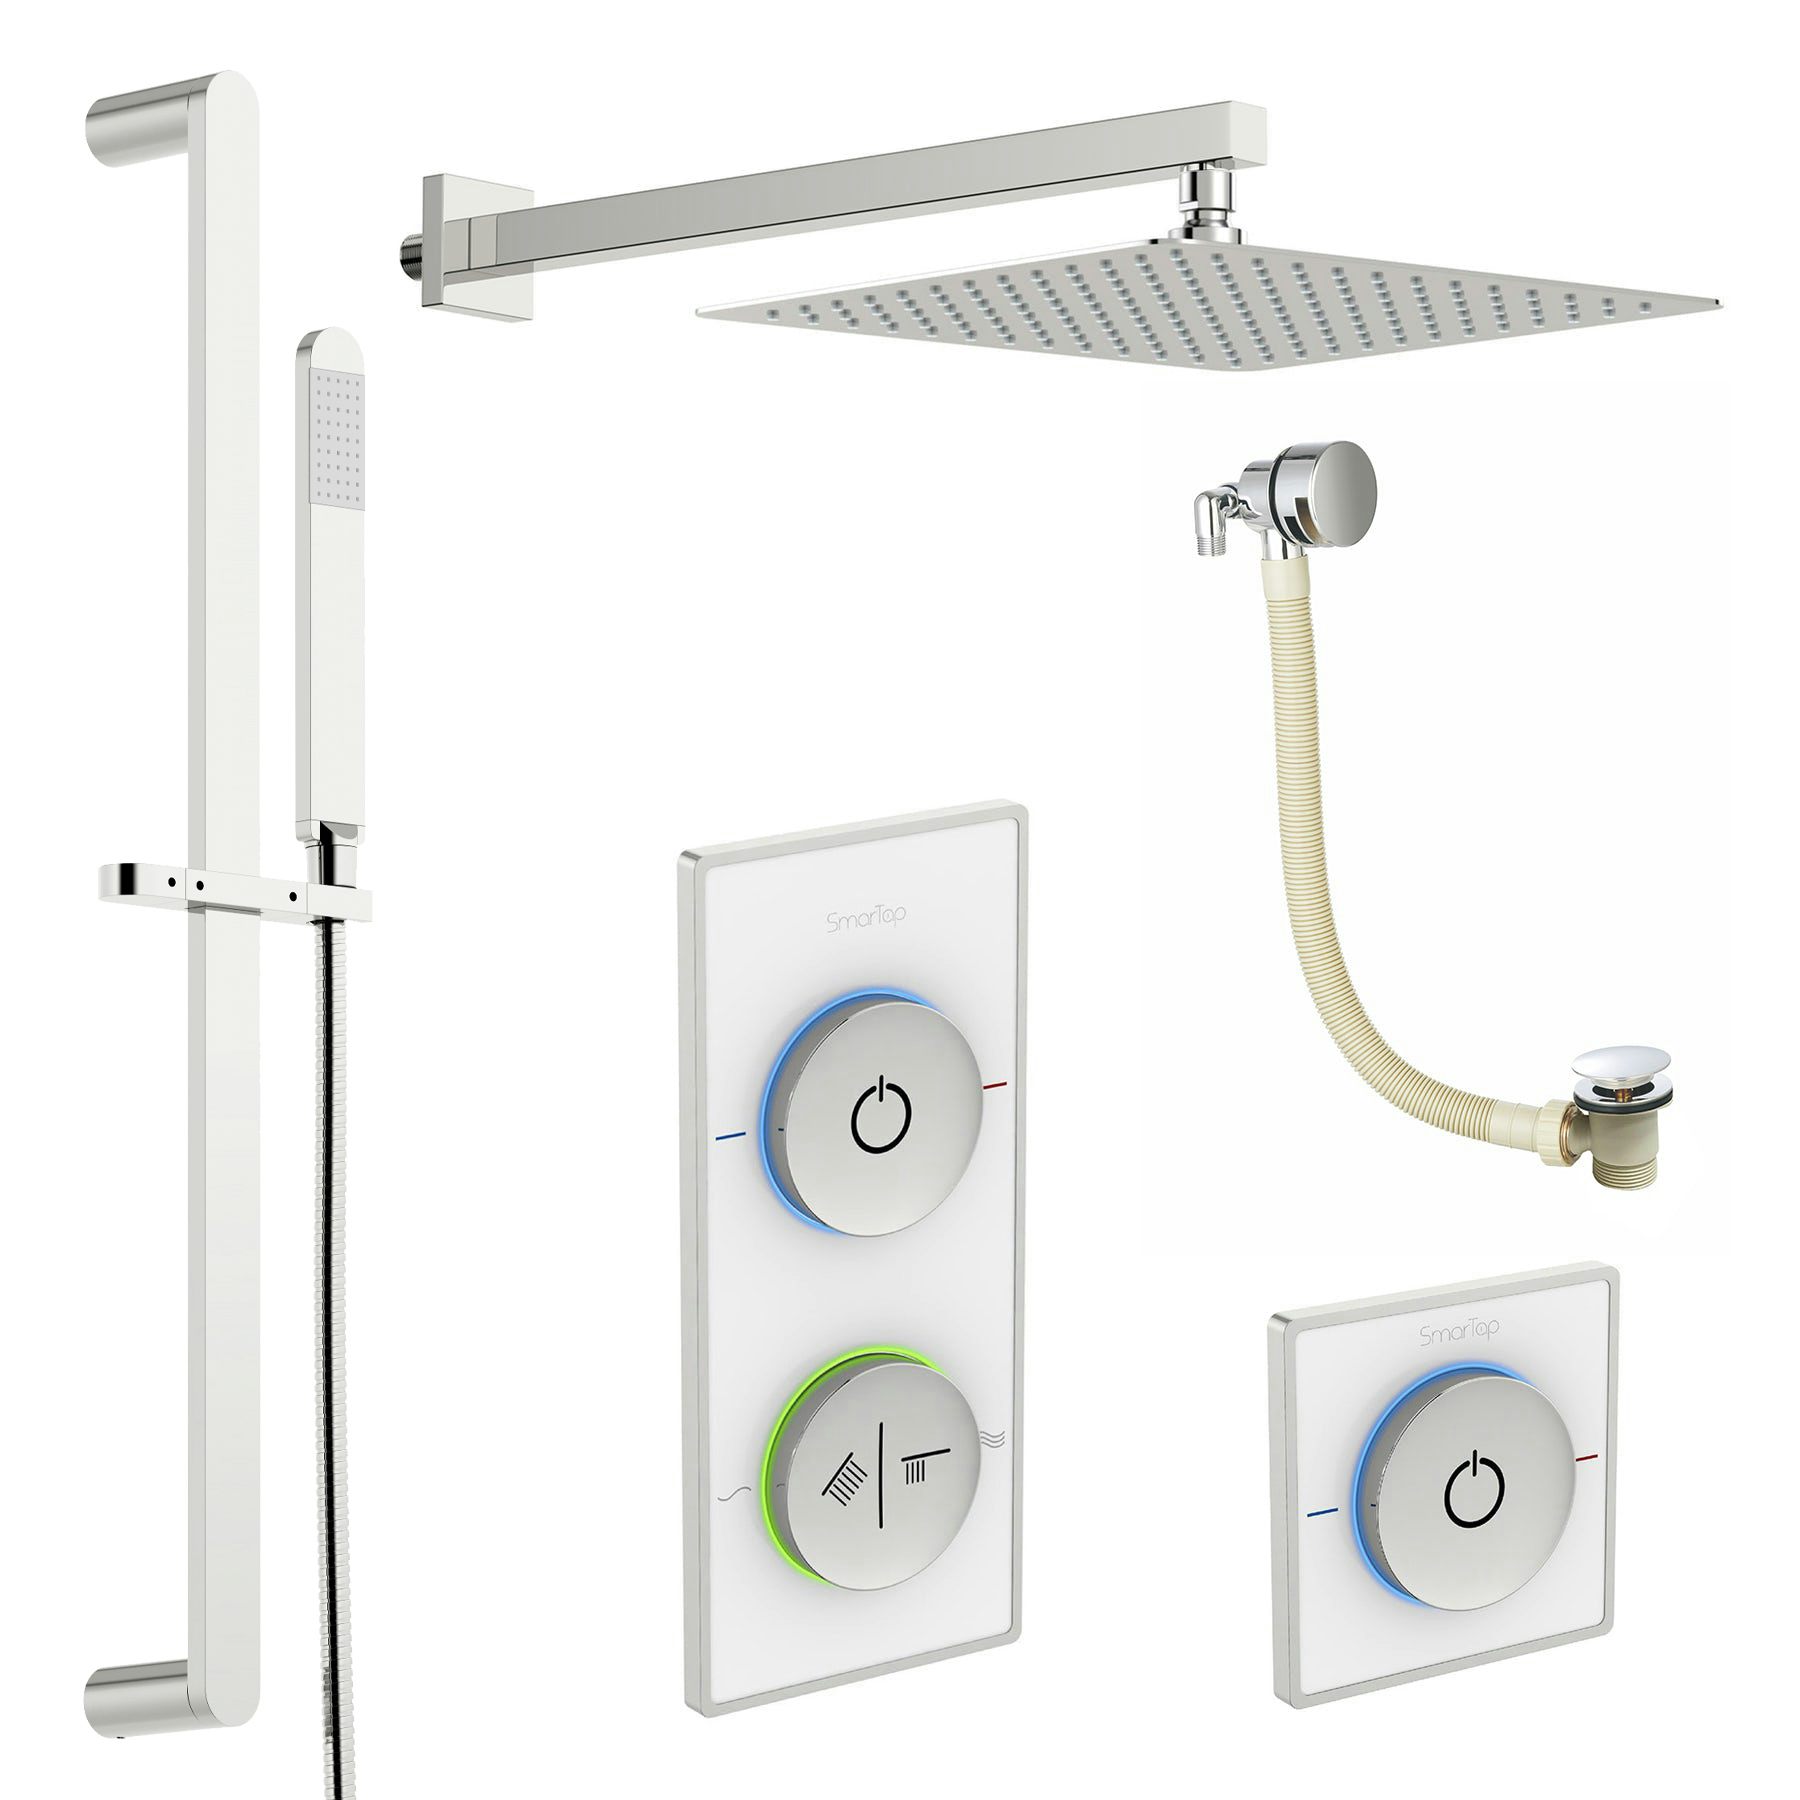 SmarTap white smart shower system with complete square wall shower bath set